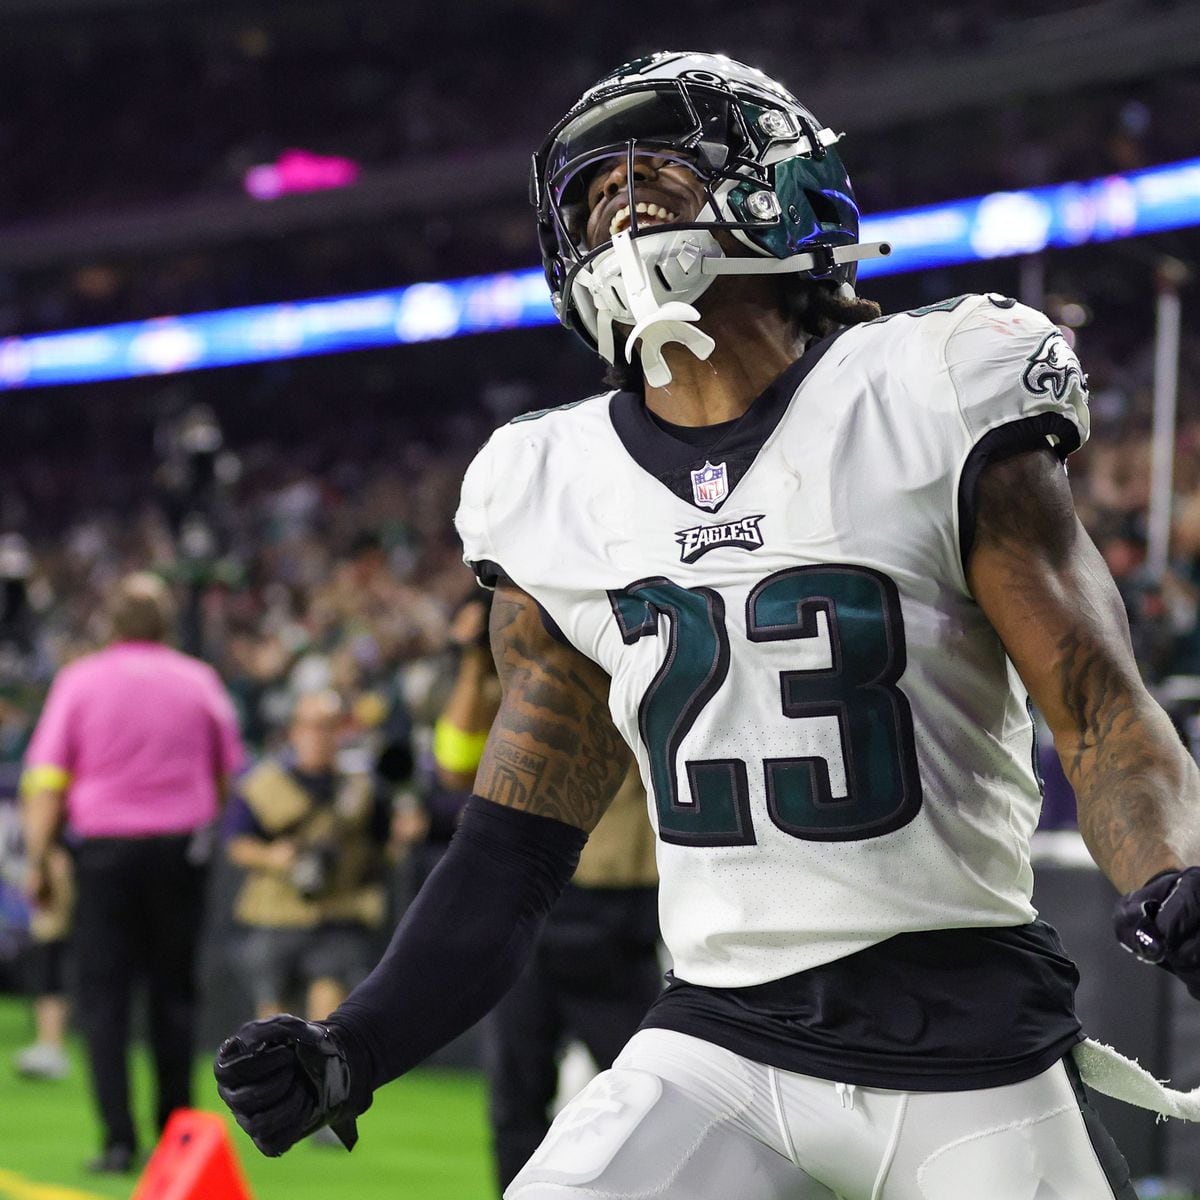 MNF Top Bets: 5 Most Popular Bets for Eagles vs. Commanders